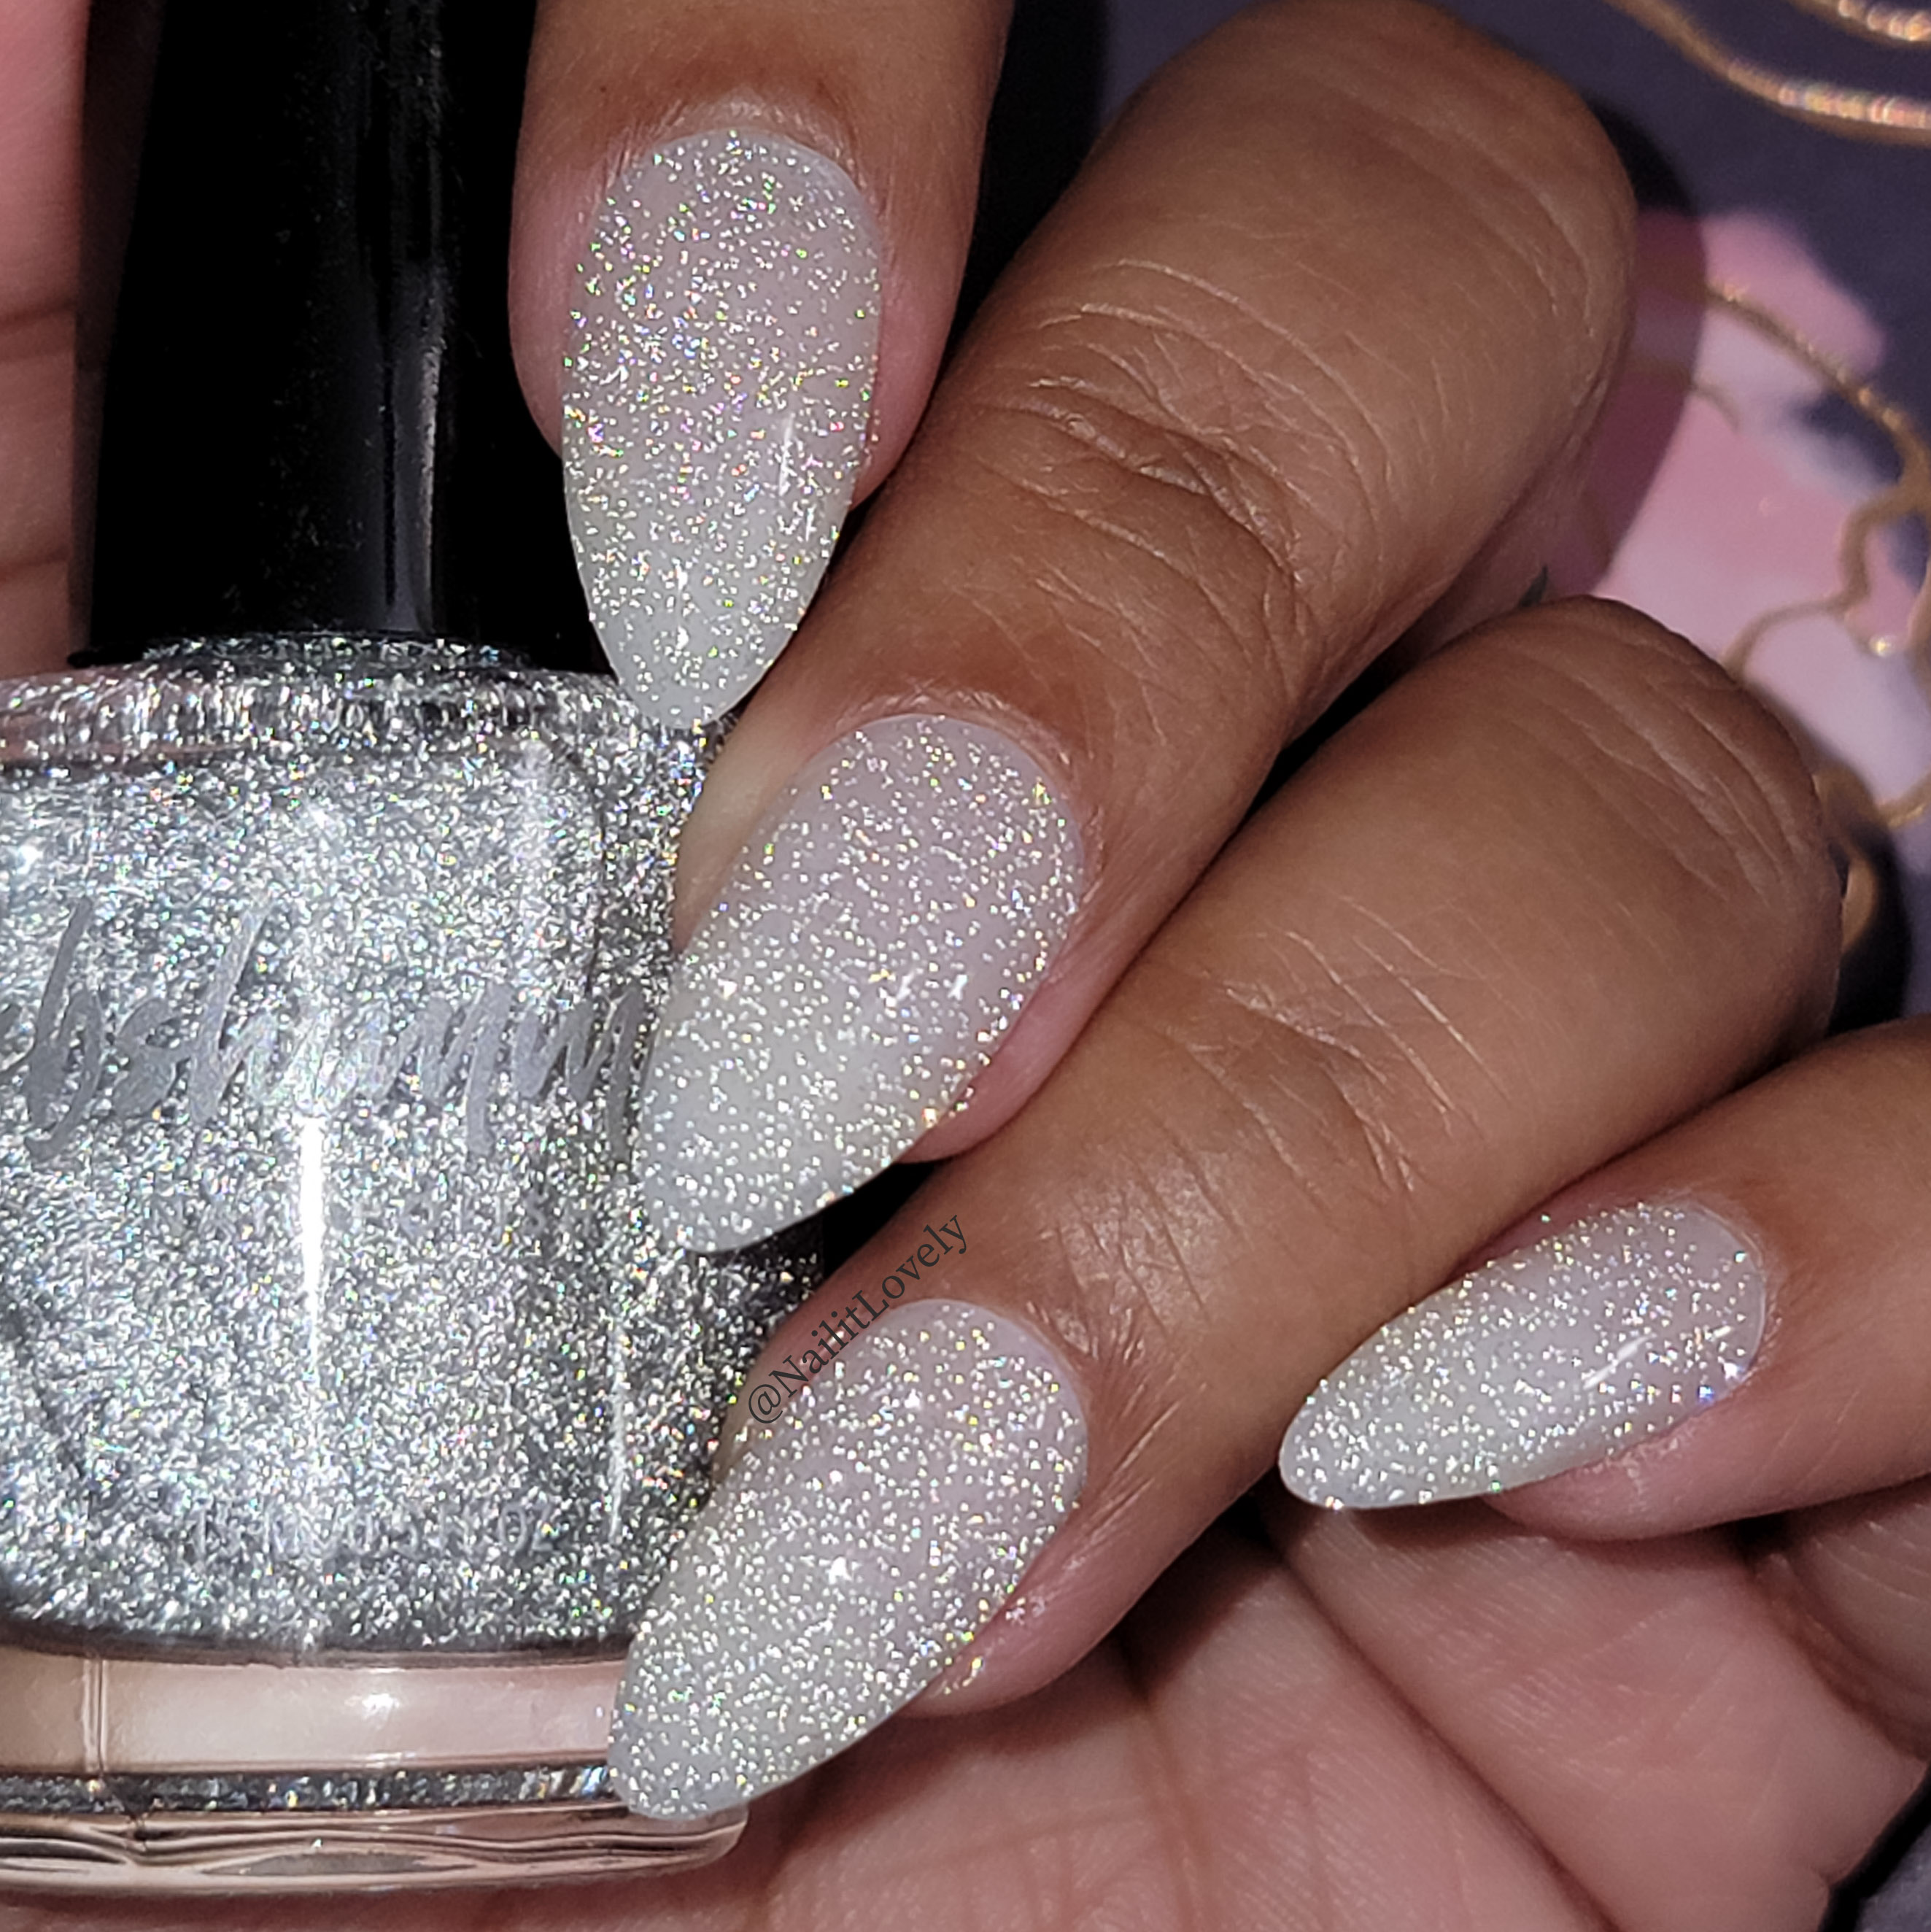 Out of Sequins Reflective Nail Polish Topper By KBShimmer